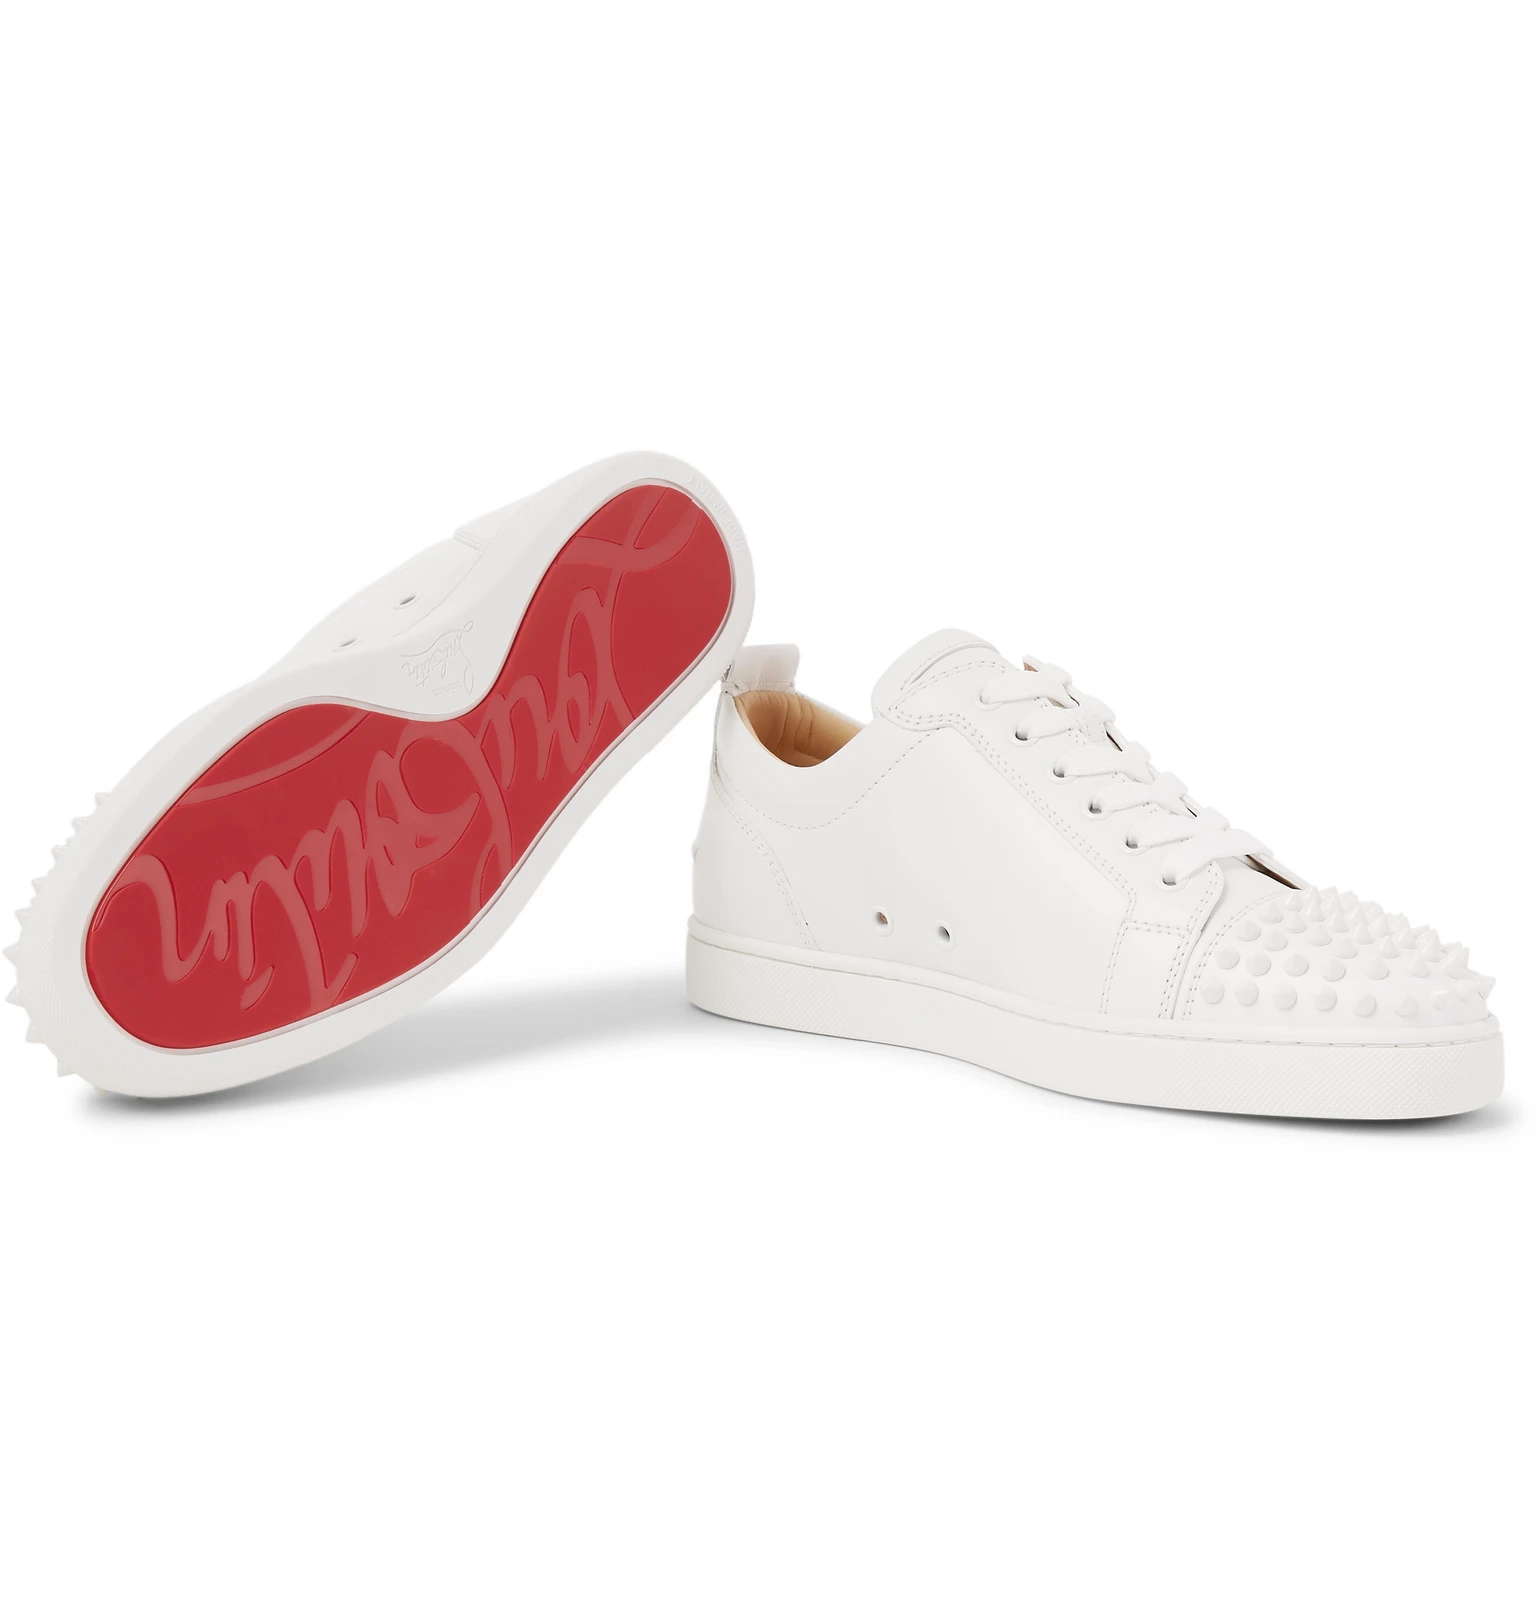 louboutin trainers spikes,therugbycatalog.com